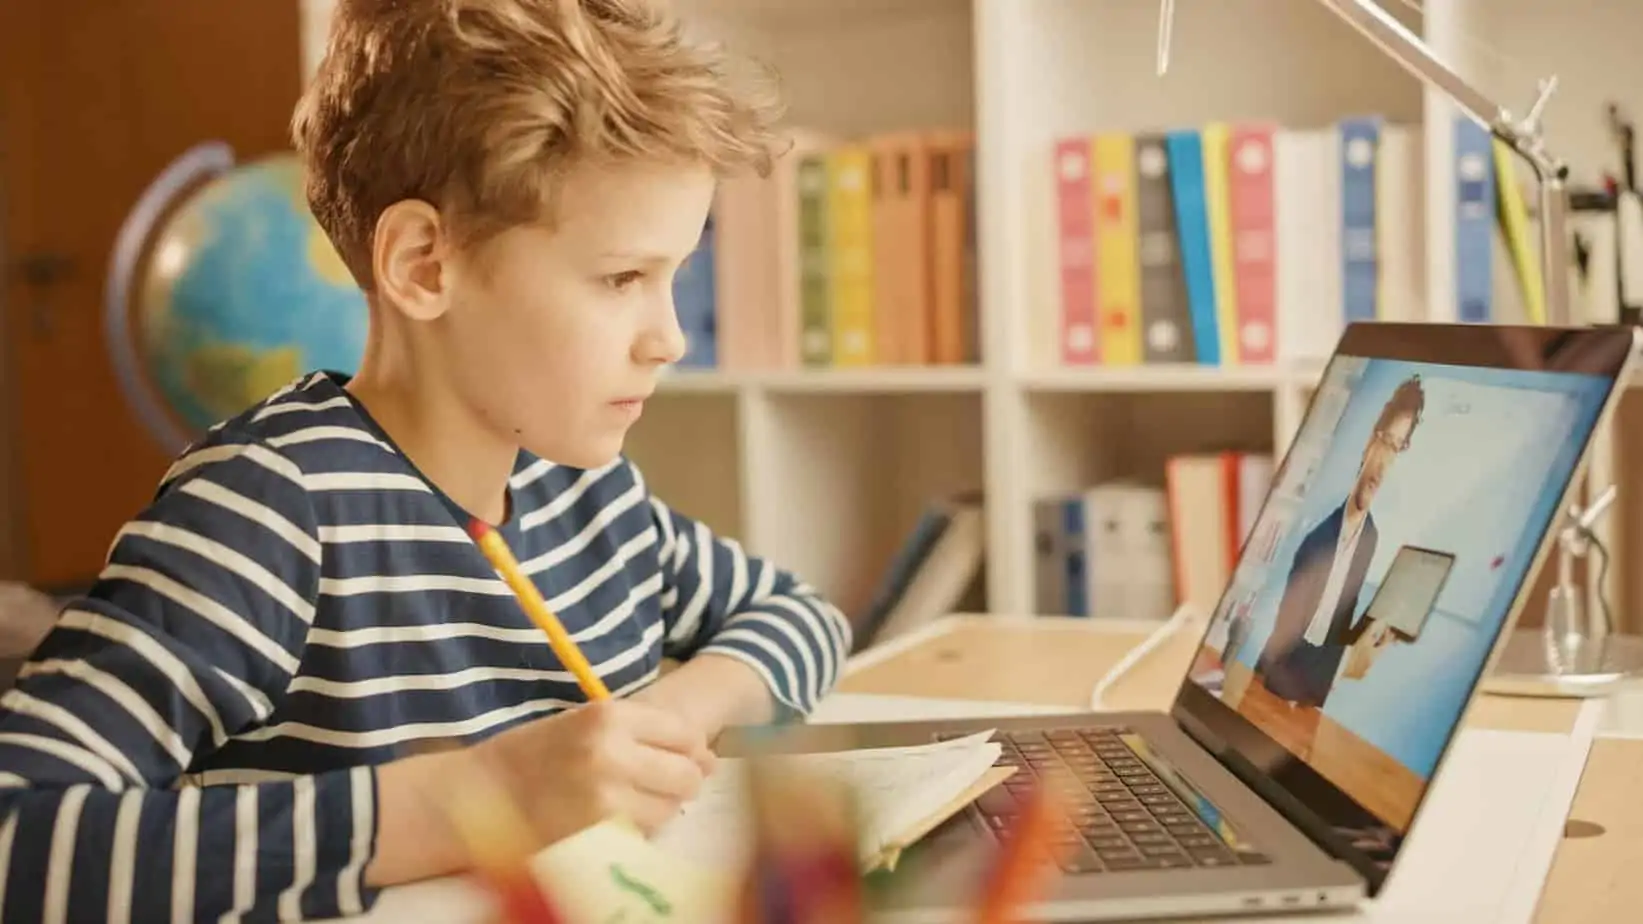 Remote learning or homeschool, what are they and how do they compare. Homeschooling and distance learning are similar, but have an equal amount of differences to consider when making an education choice for your child. 